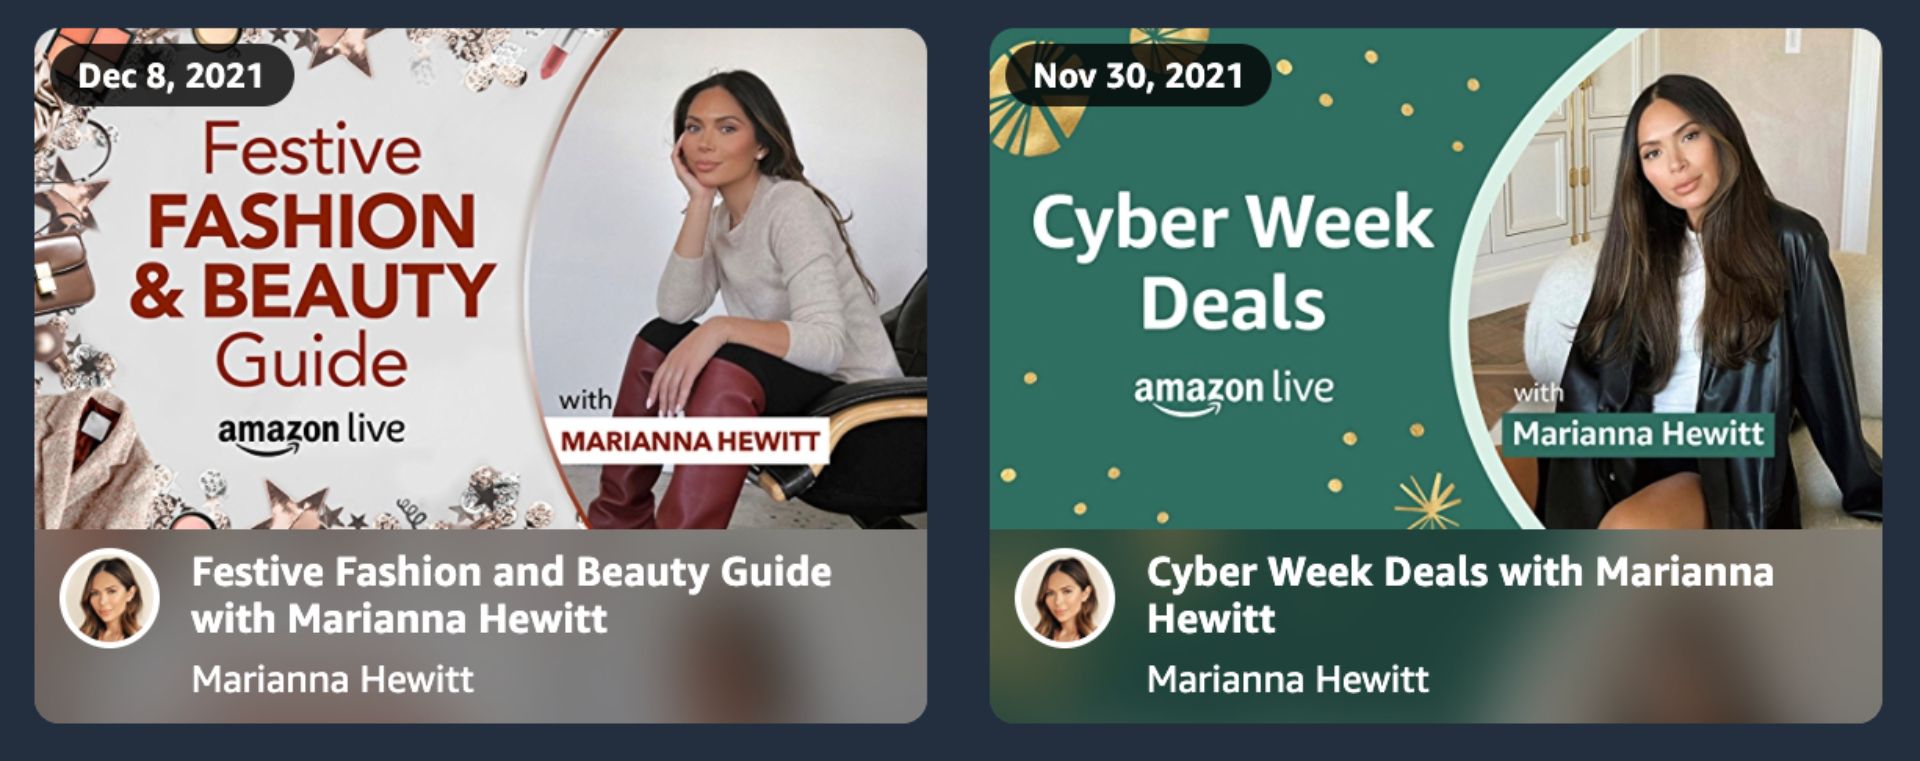 two thumbnails showing influencer, Marianna Hewitt, promoting fashion and beauty livestreams.